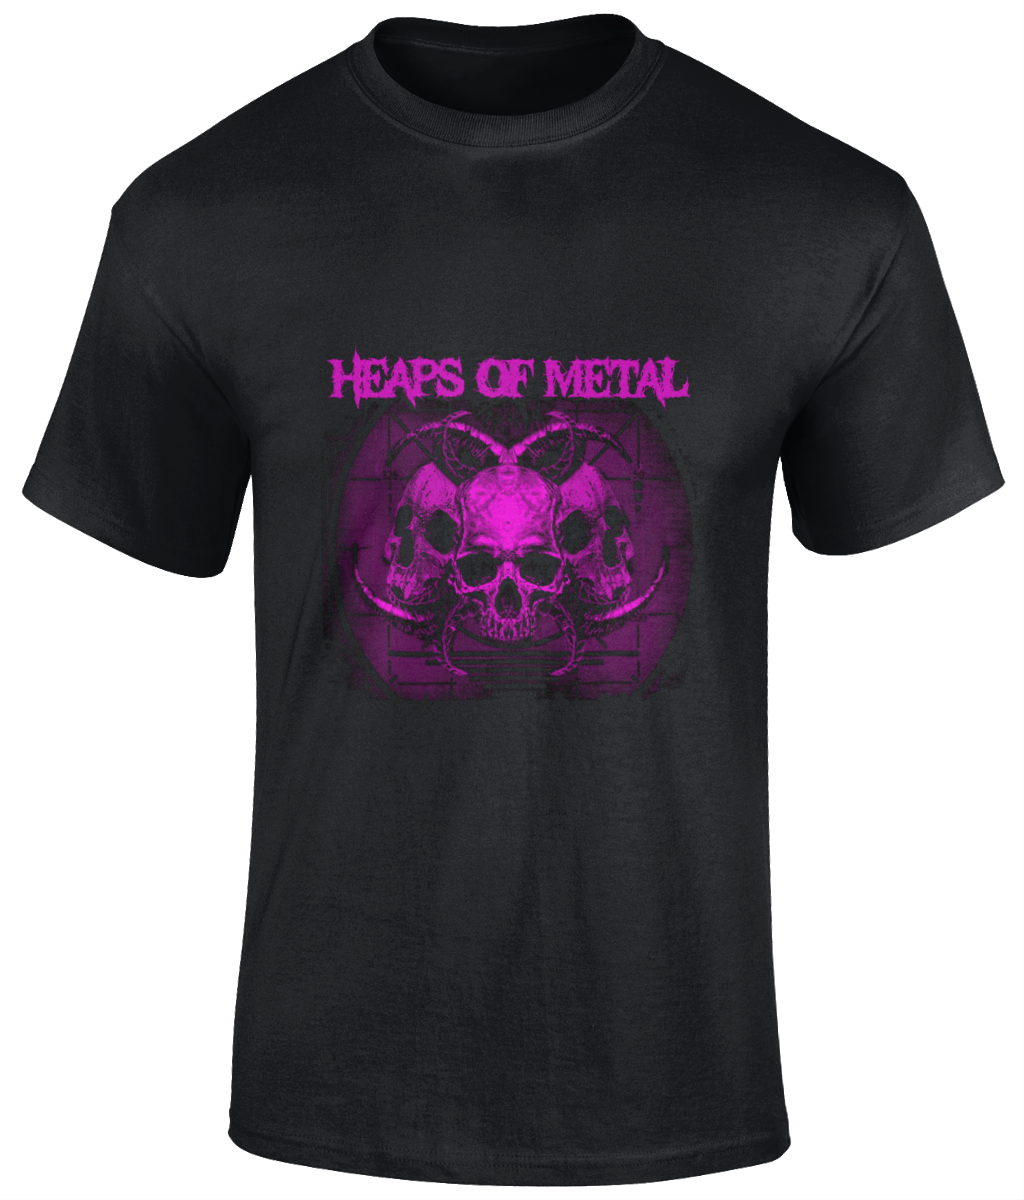 HEAPS OF METAL ARTWORK IN PINK on black unisex t shirt.  Material: 100% cotton.  Seamless twin needle collar. Taped neck and shoulders. Tubular body. Twin needle sleeves and hem. Sizes small to 5XL